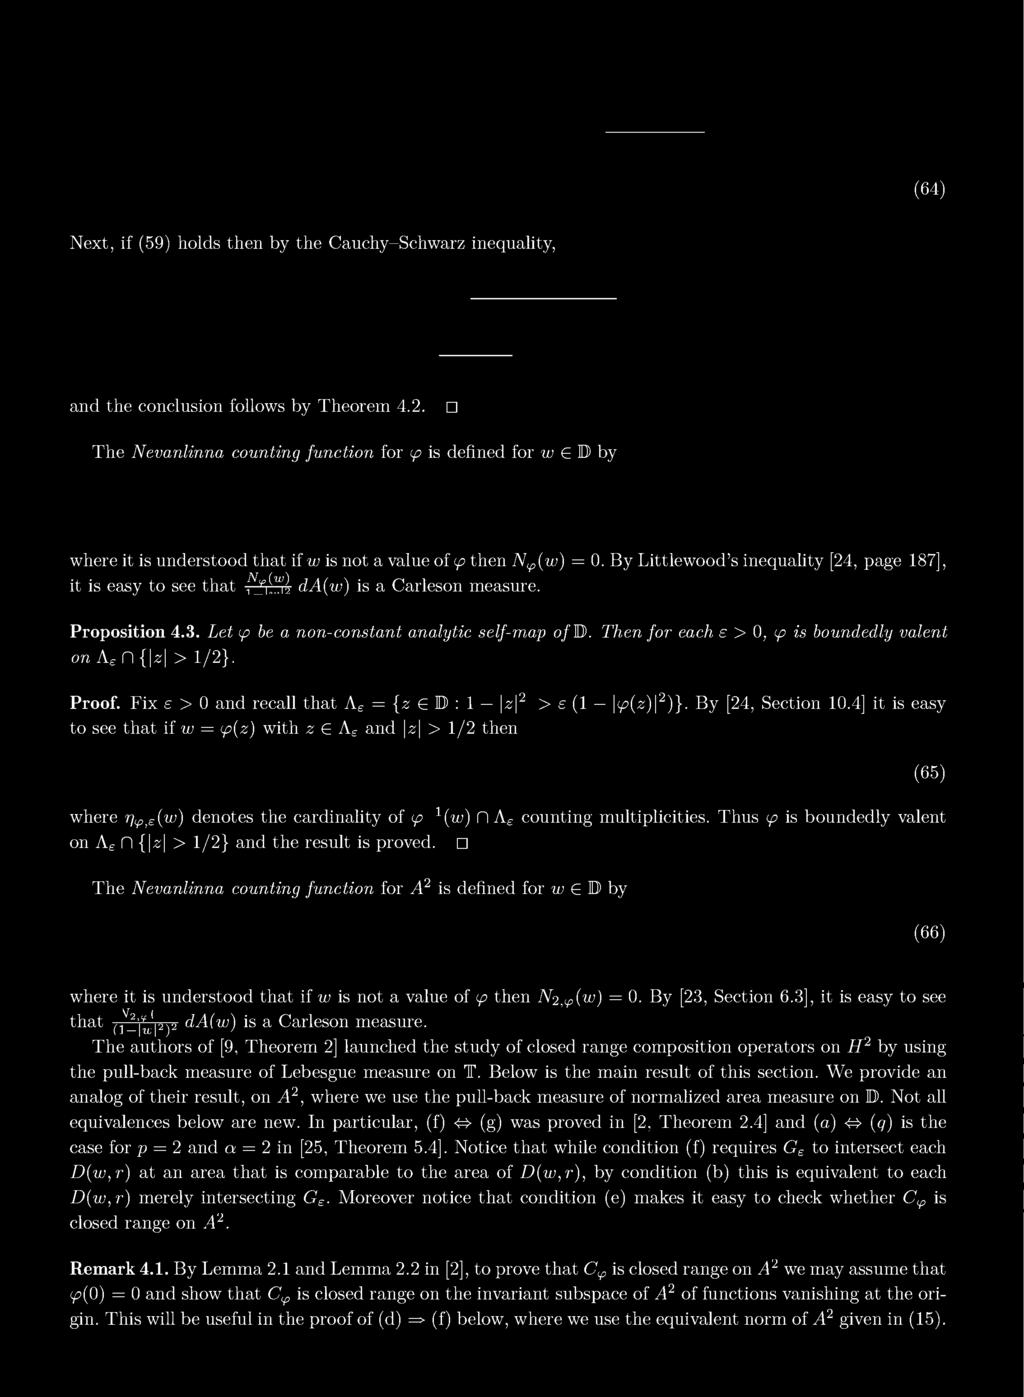 By Littlewood s inequality [24, page 187], it is easy to see that Nφ(w)/1- w 2 da(w) is a Carleson measure. Proposition 4.3. Let φ be a non-constant analytic self-map of D.